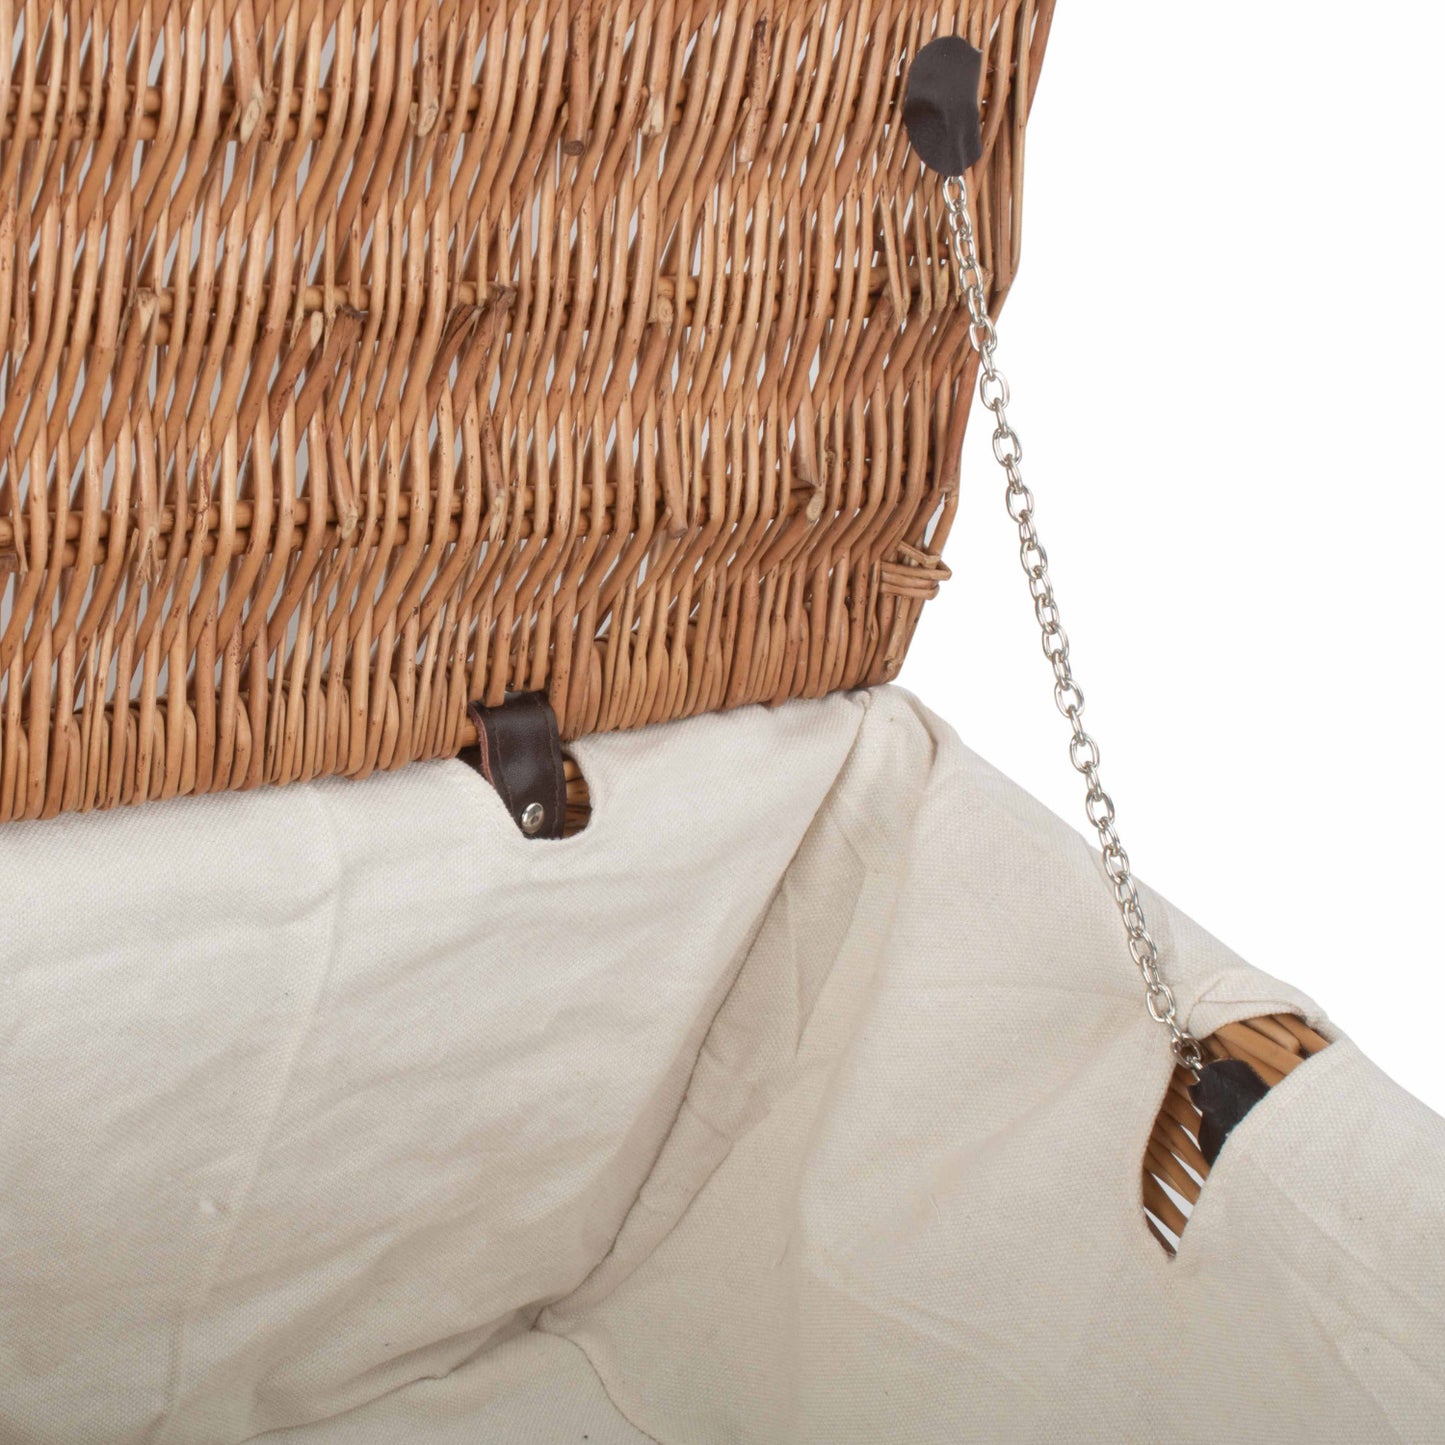 22 Inch Double Steamed Hamper With White Lining